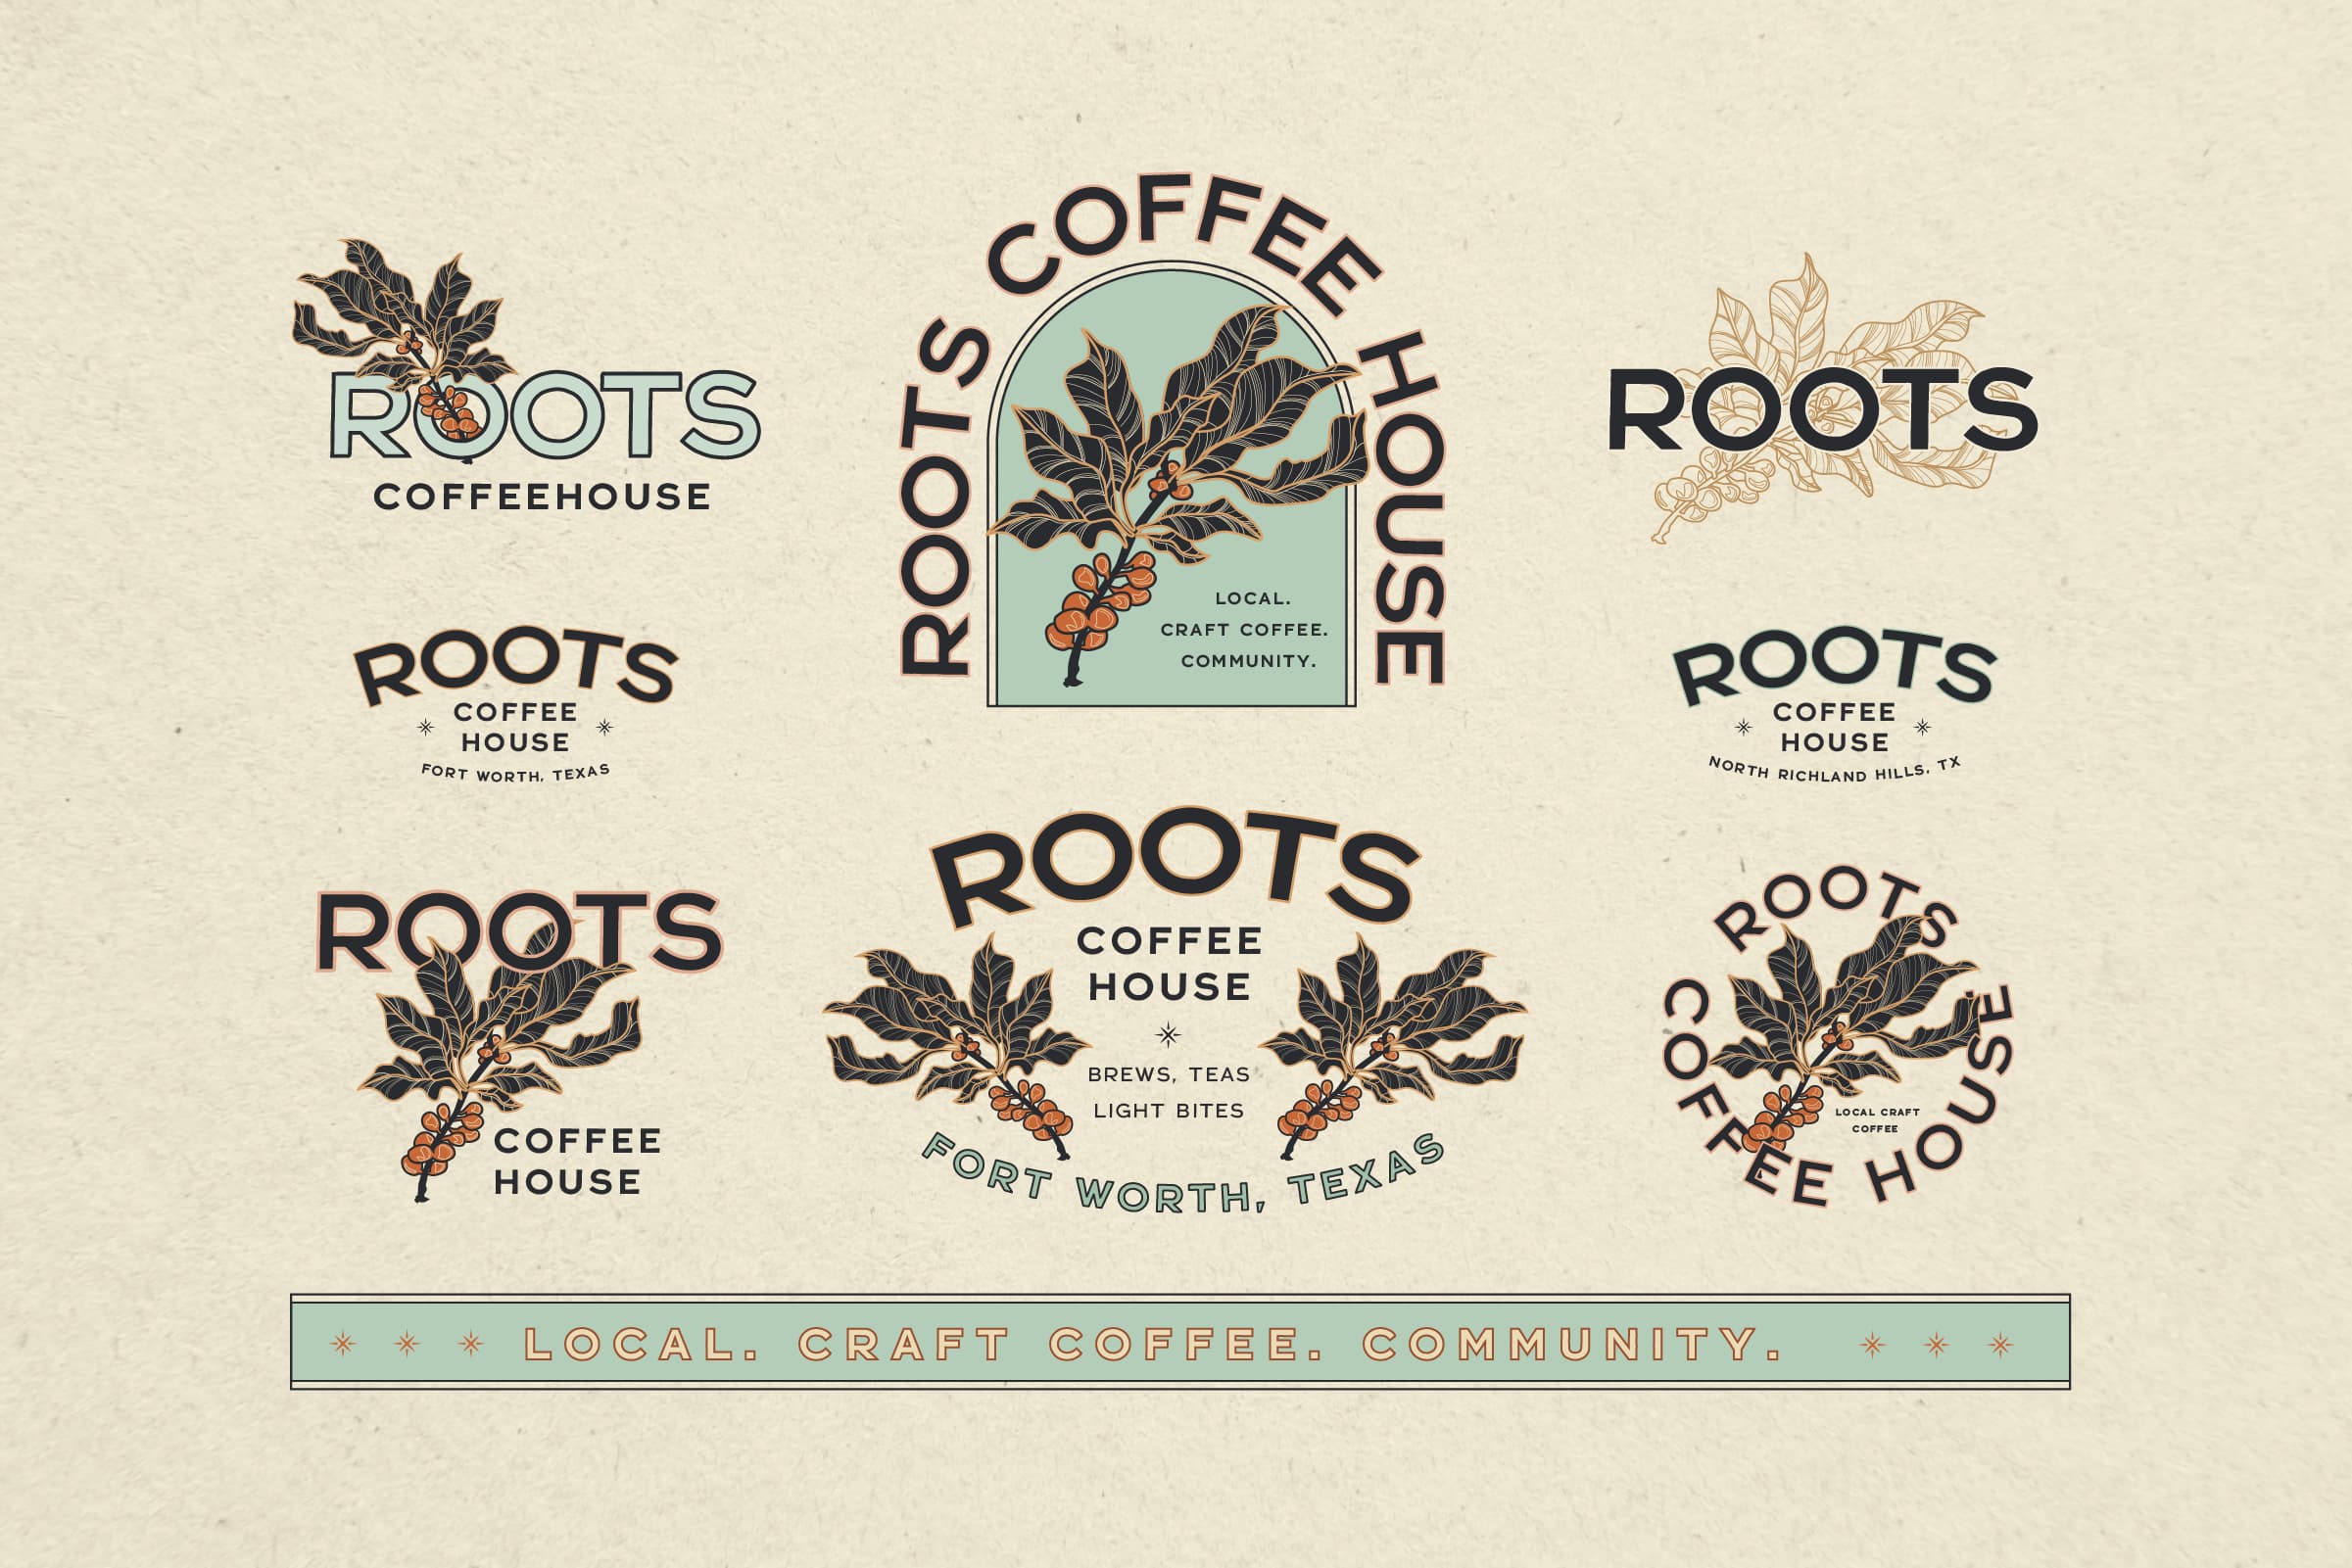 roots coffee house branding design visual identity system